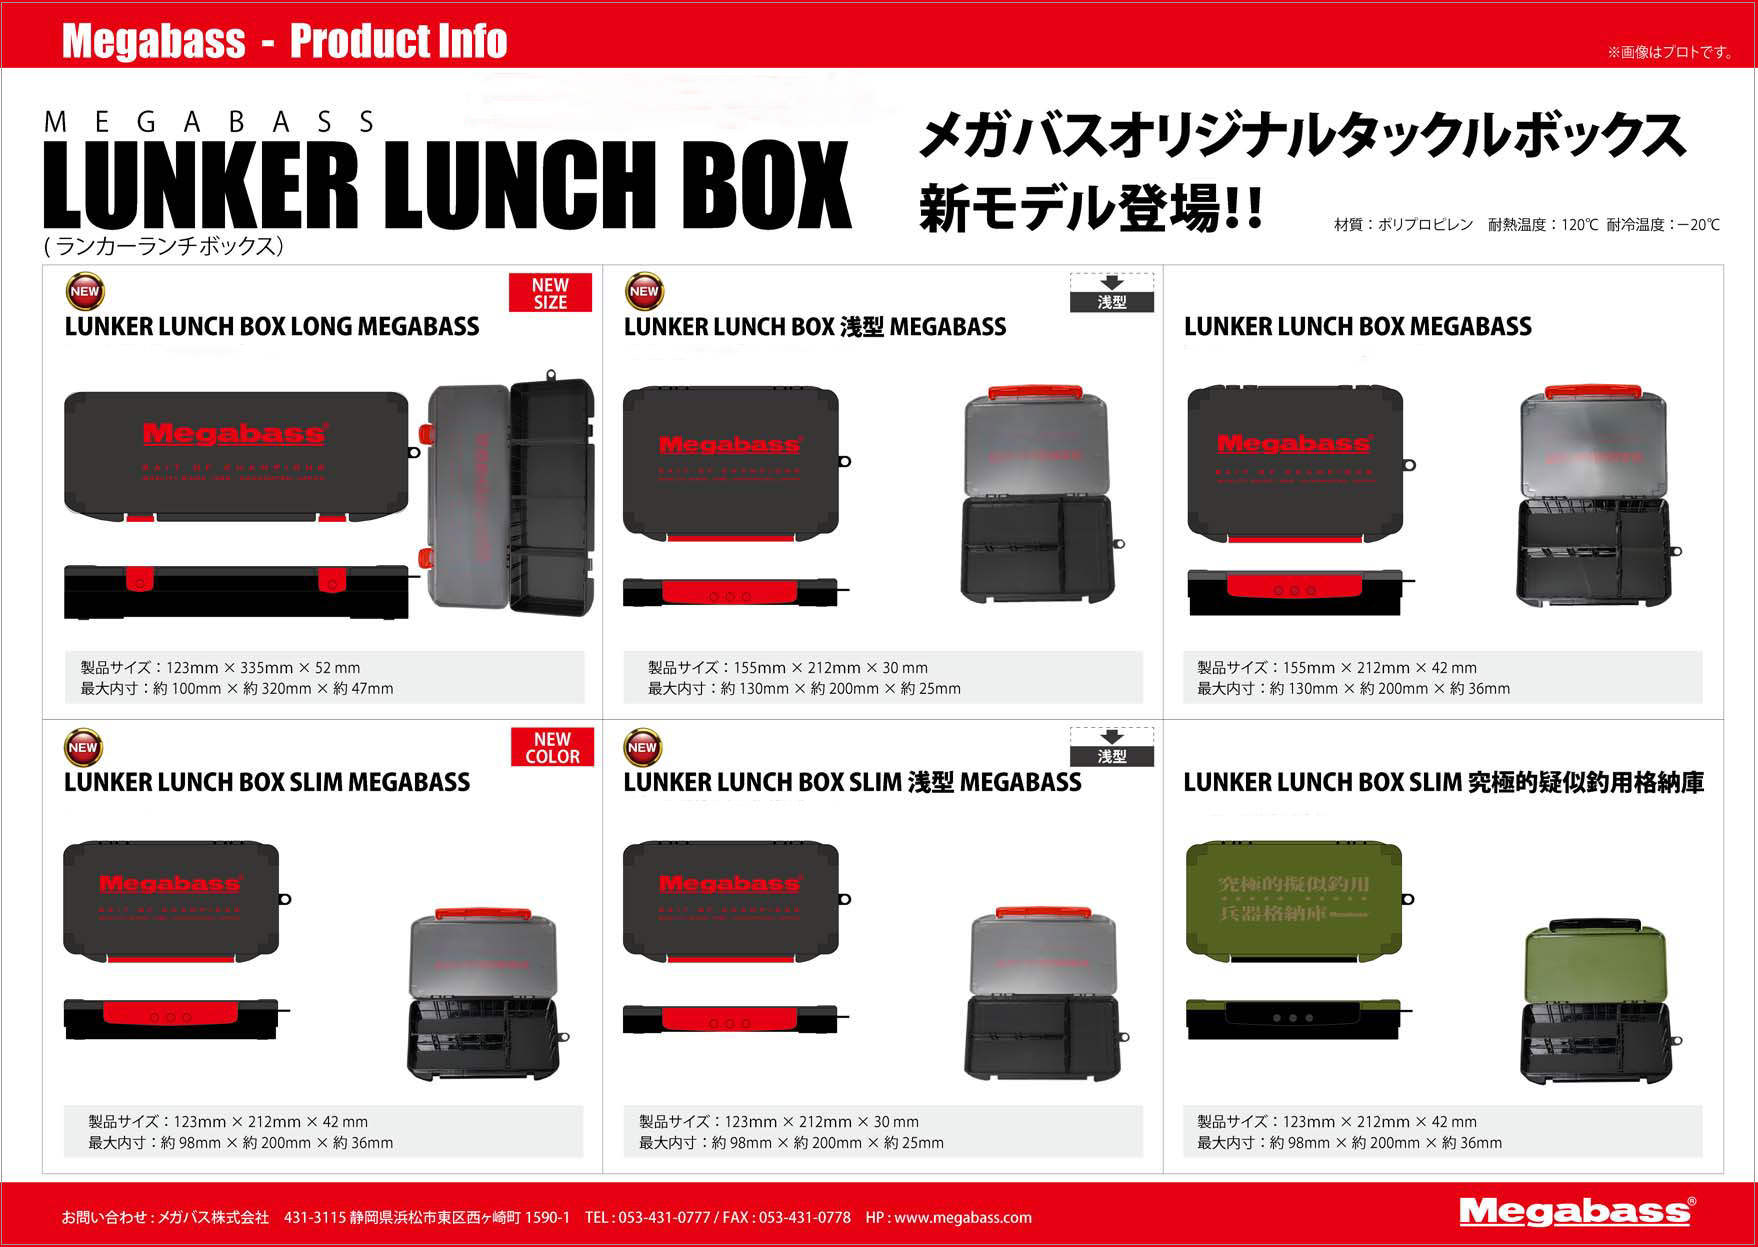 LUNKER LUNCH BOX